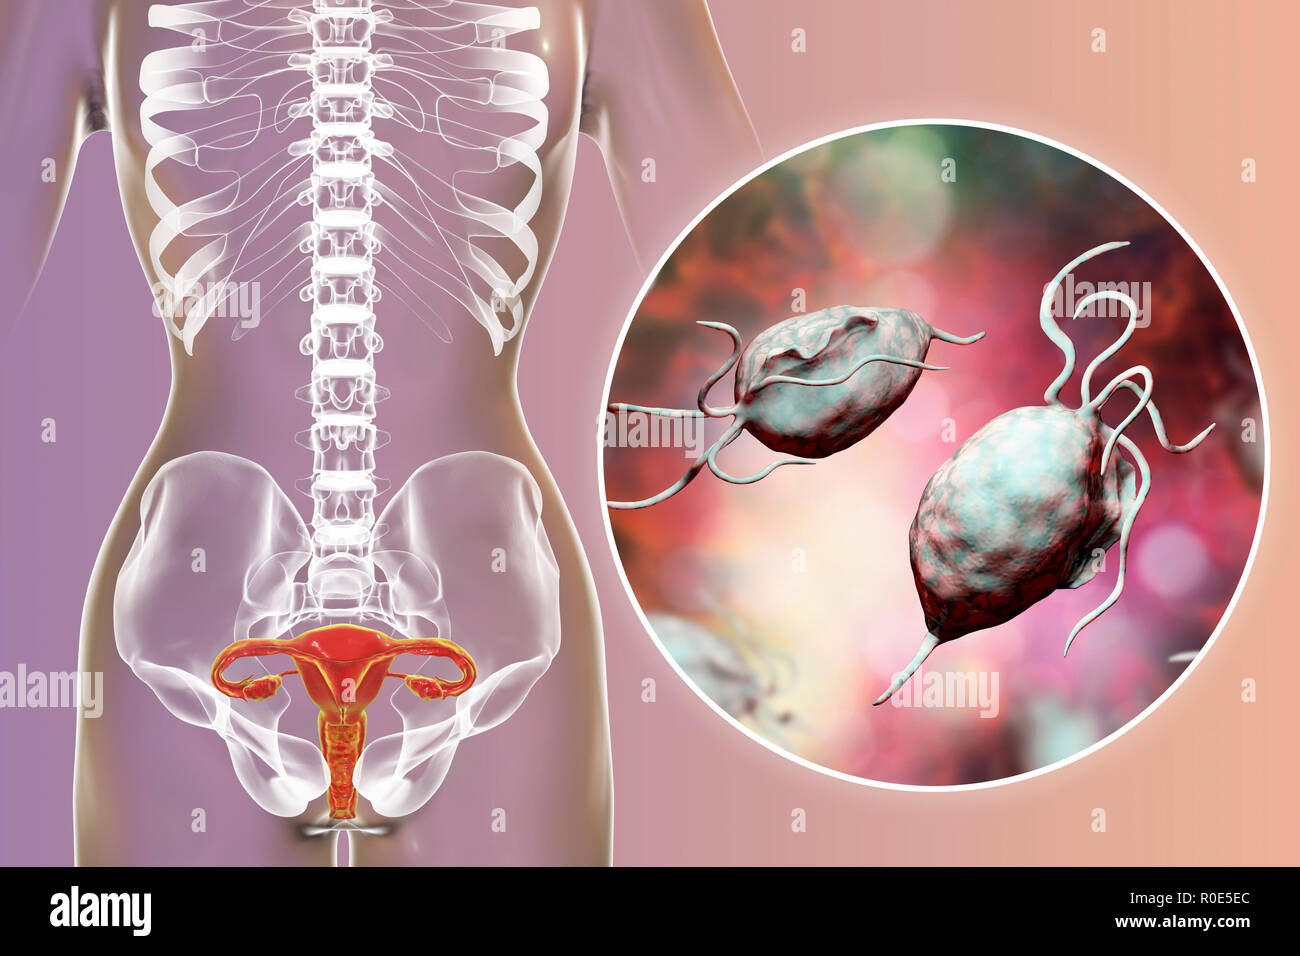 Trichomoniasis, illustration. Computer illustration of the female reproductive system and the parasitic microorganism Trichomonas vaginalis, which is the causative agent of trichomoniasis. Trichomoniasis is a common cause of vaginitis and is a sexually transmitted disease. Stock Photo